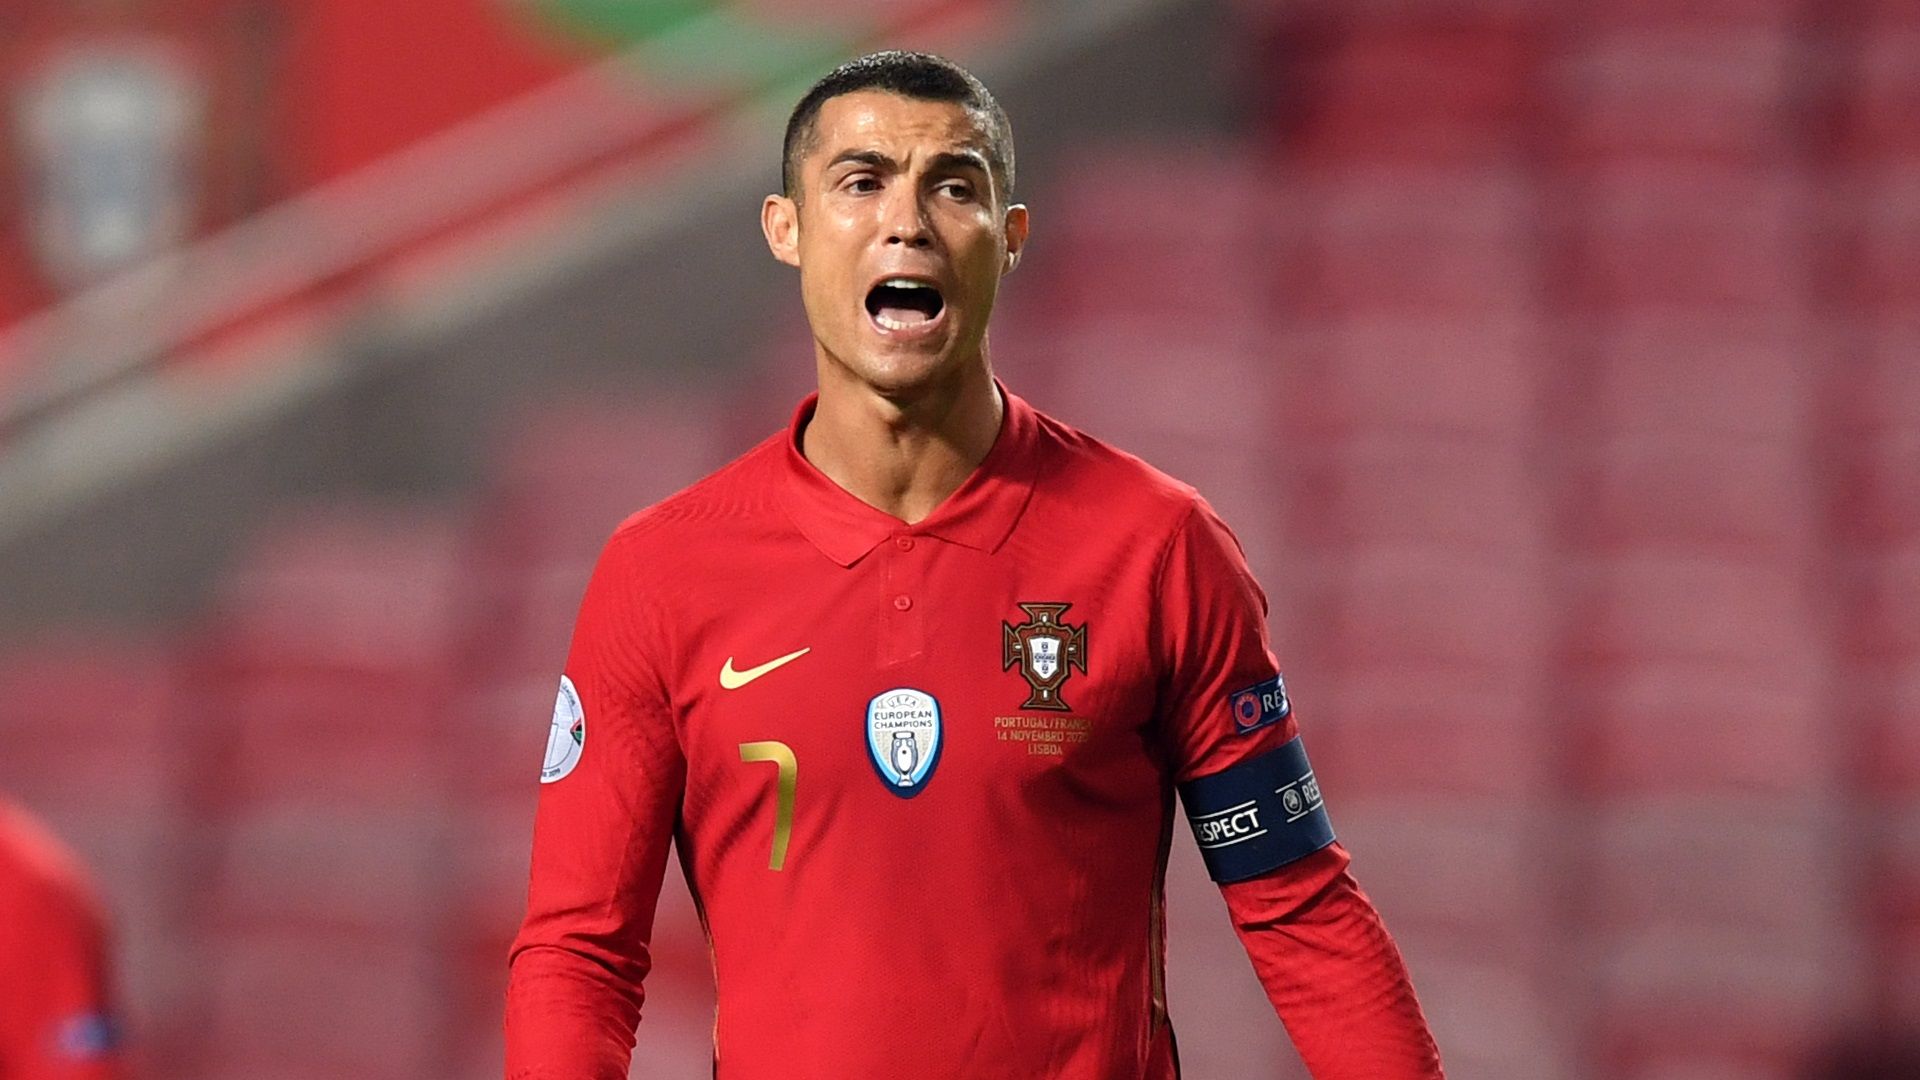 Ronaldo's main goal is the World Cup' star's future speculation must 'stay away' from Portugal squad, says Santos